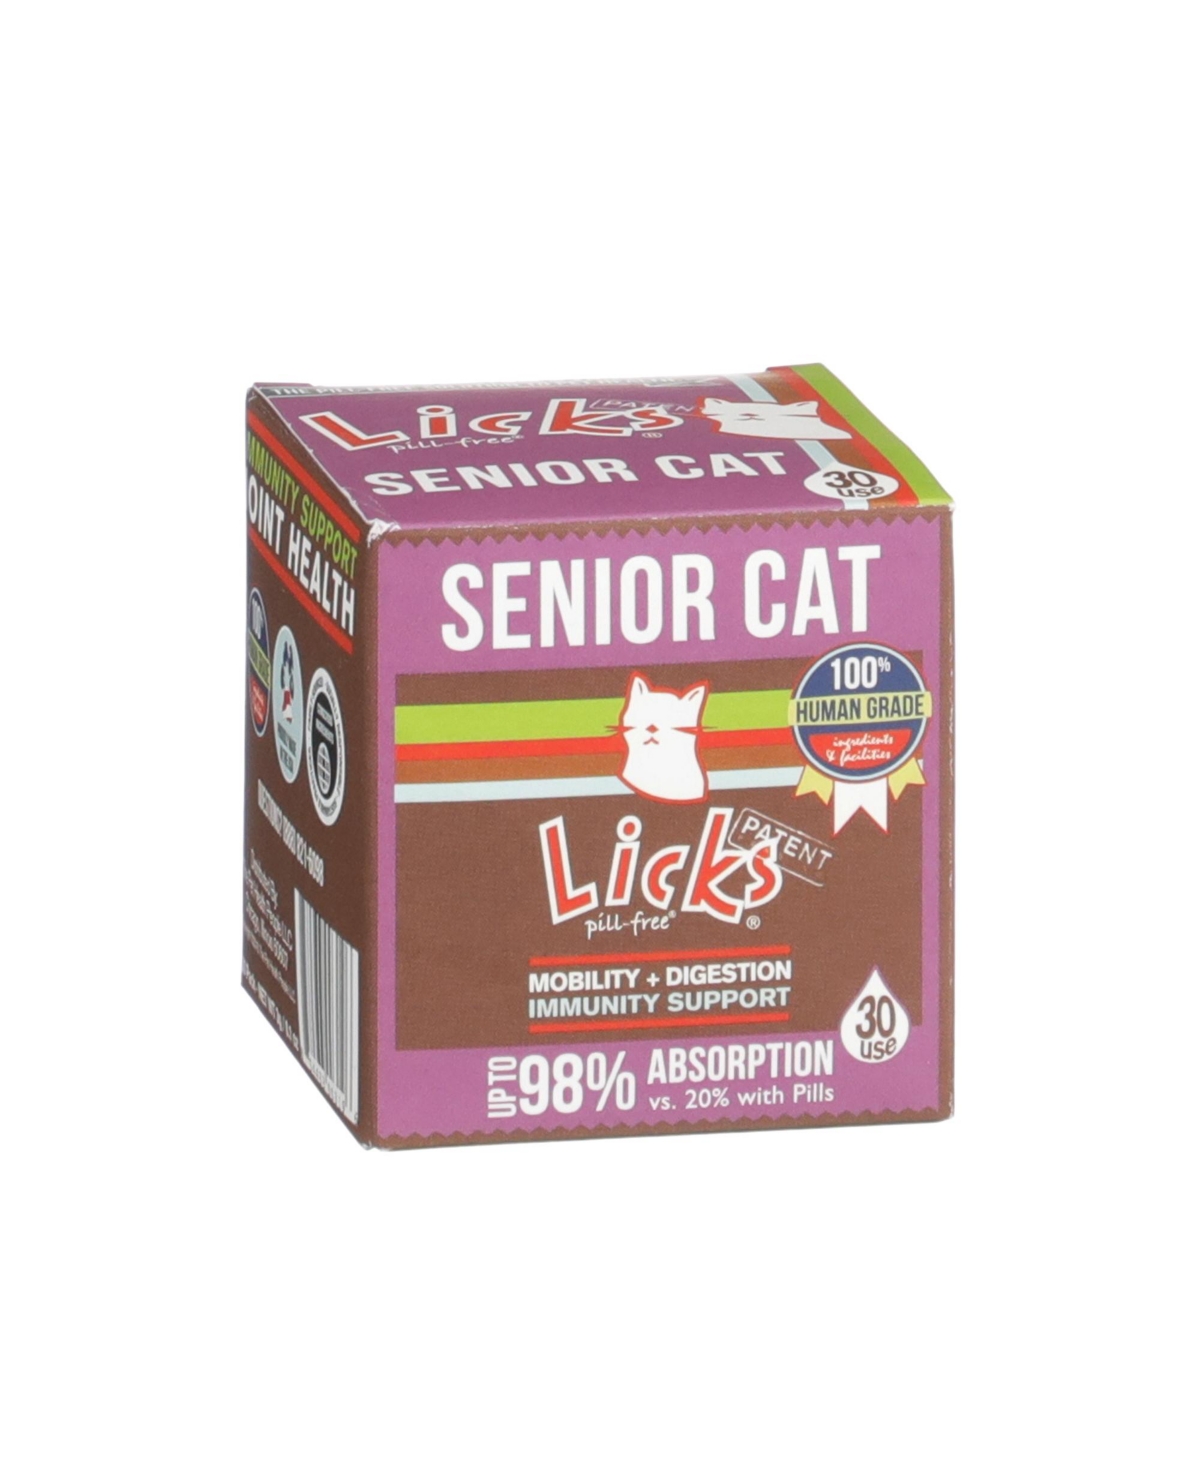 Licks Pill-Free Senior Cat - Joint Support & Digestion Supplement for Senior Cats - Immunity Vitamins & Heart Health Supplements for O